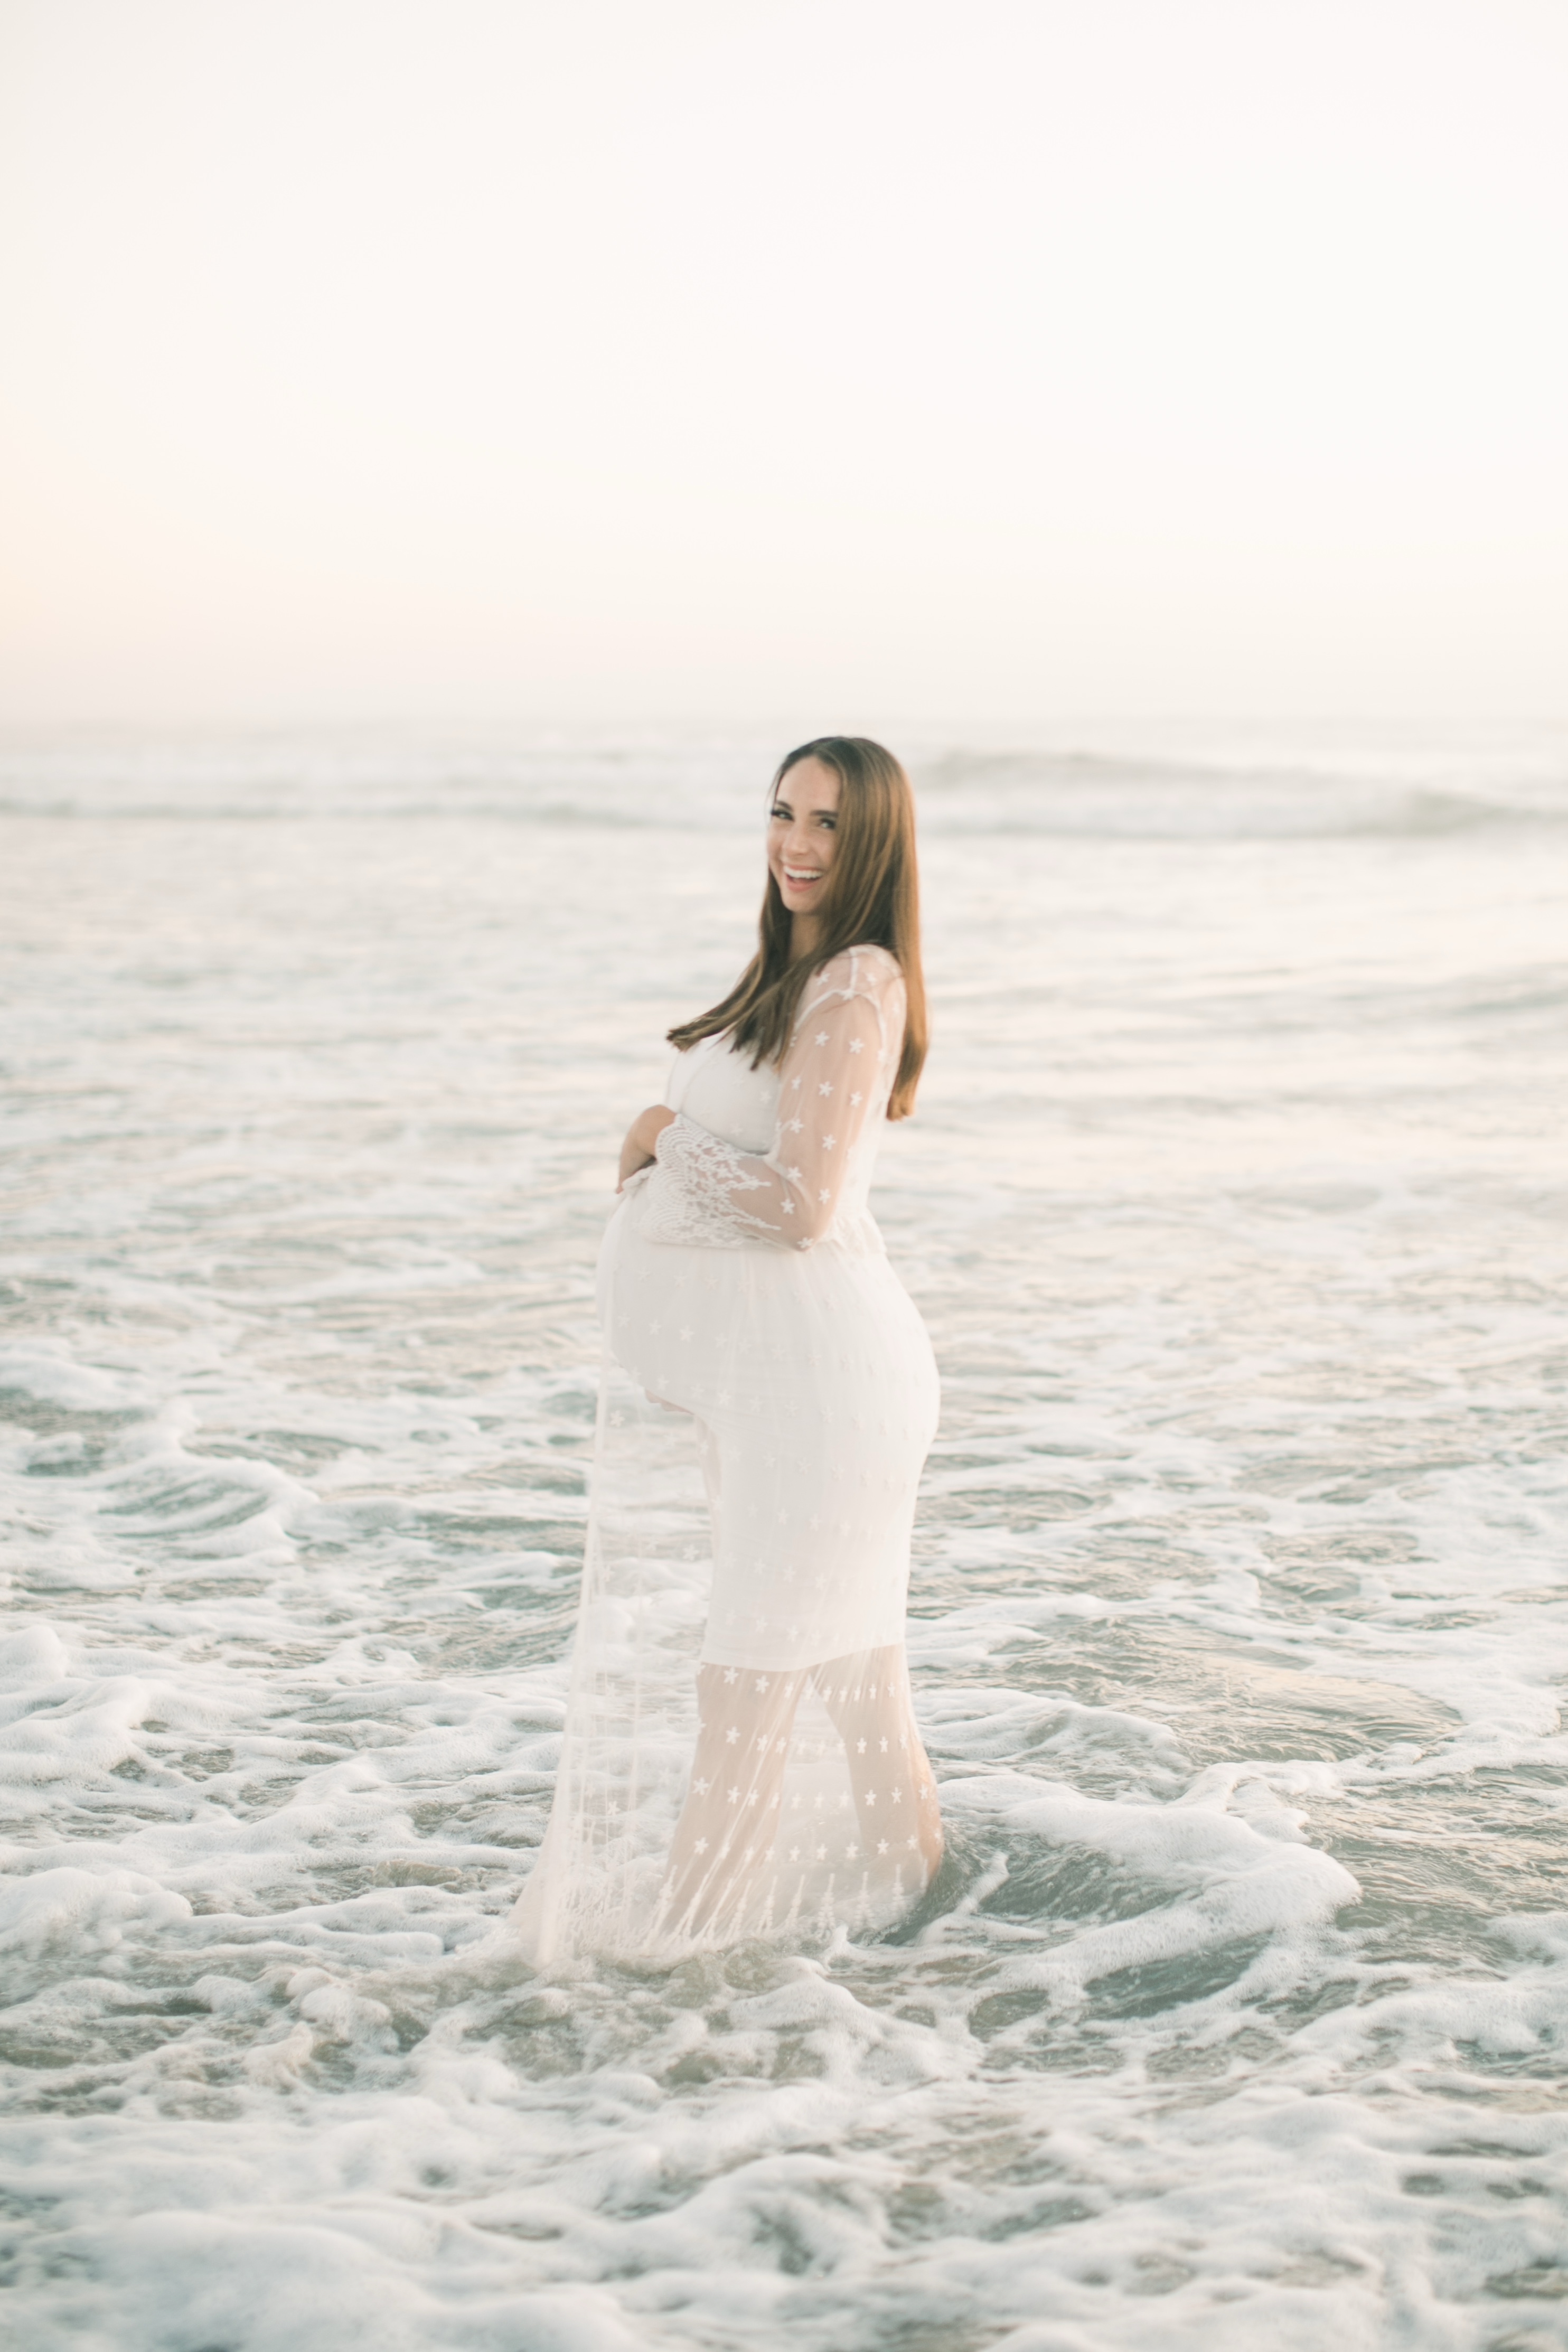 Maternity Fashion-White Lace Maternity Dress Sheer Beach cover maternity photo outfit ideas